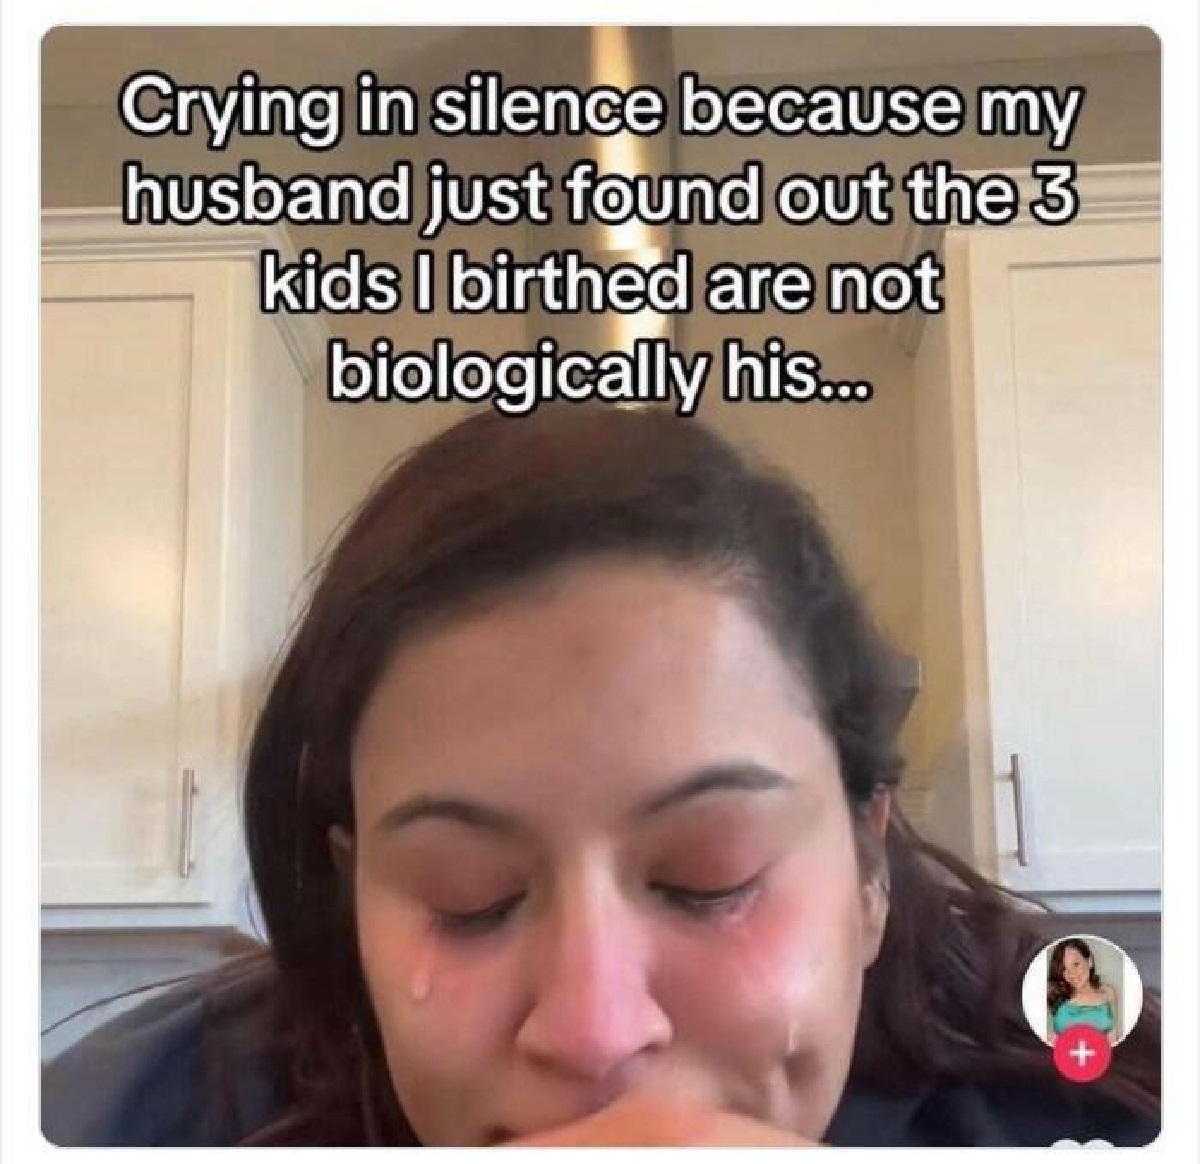 photo caption - Crying in silence because my husband just found out the 3 kids I birthed are not biologically his...